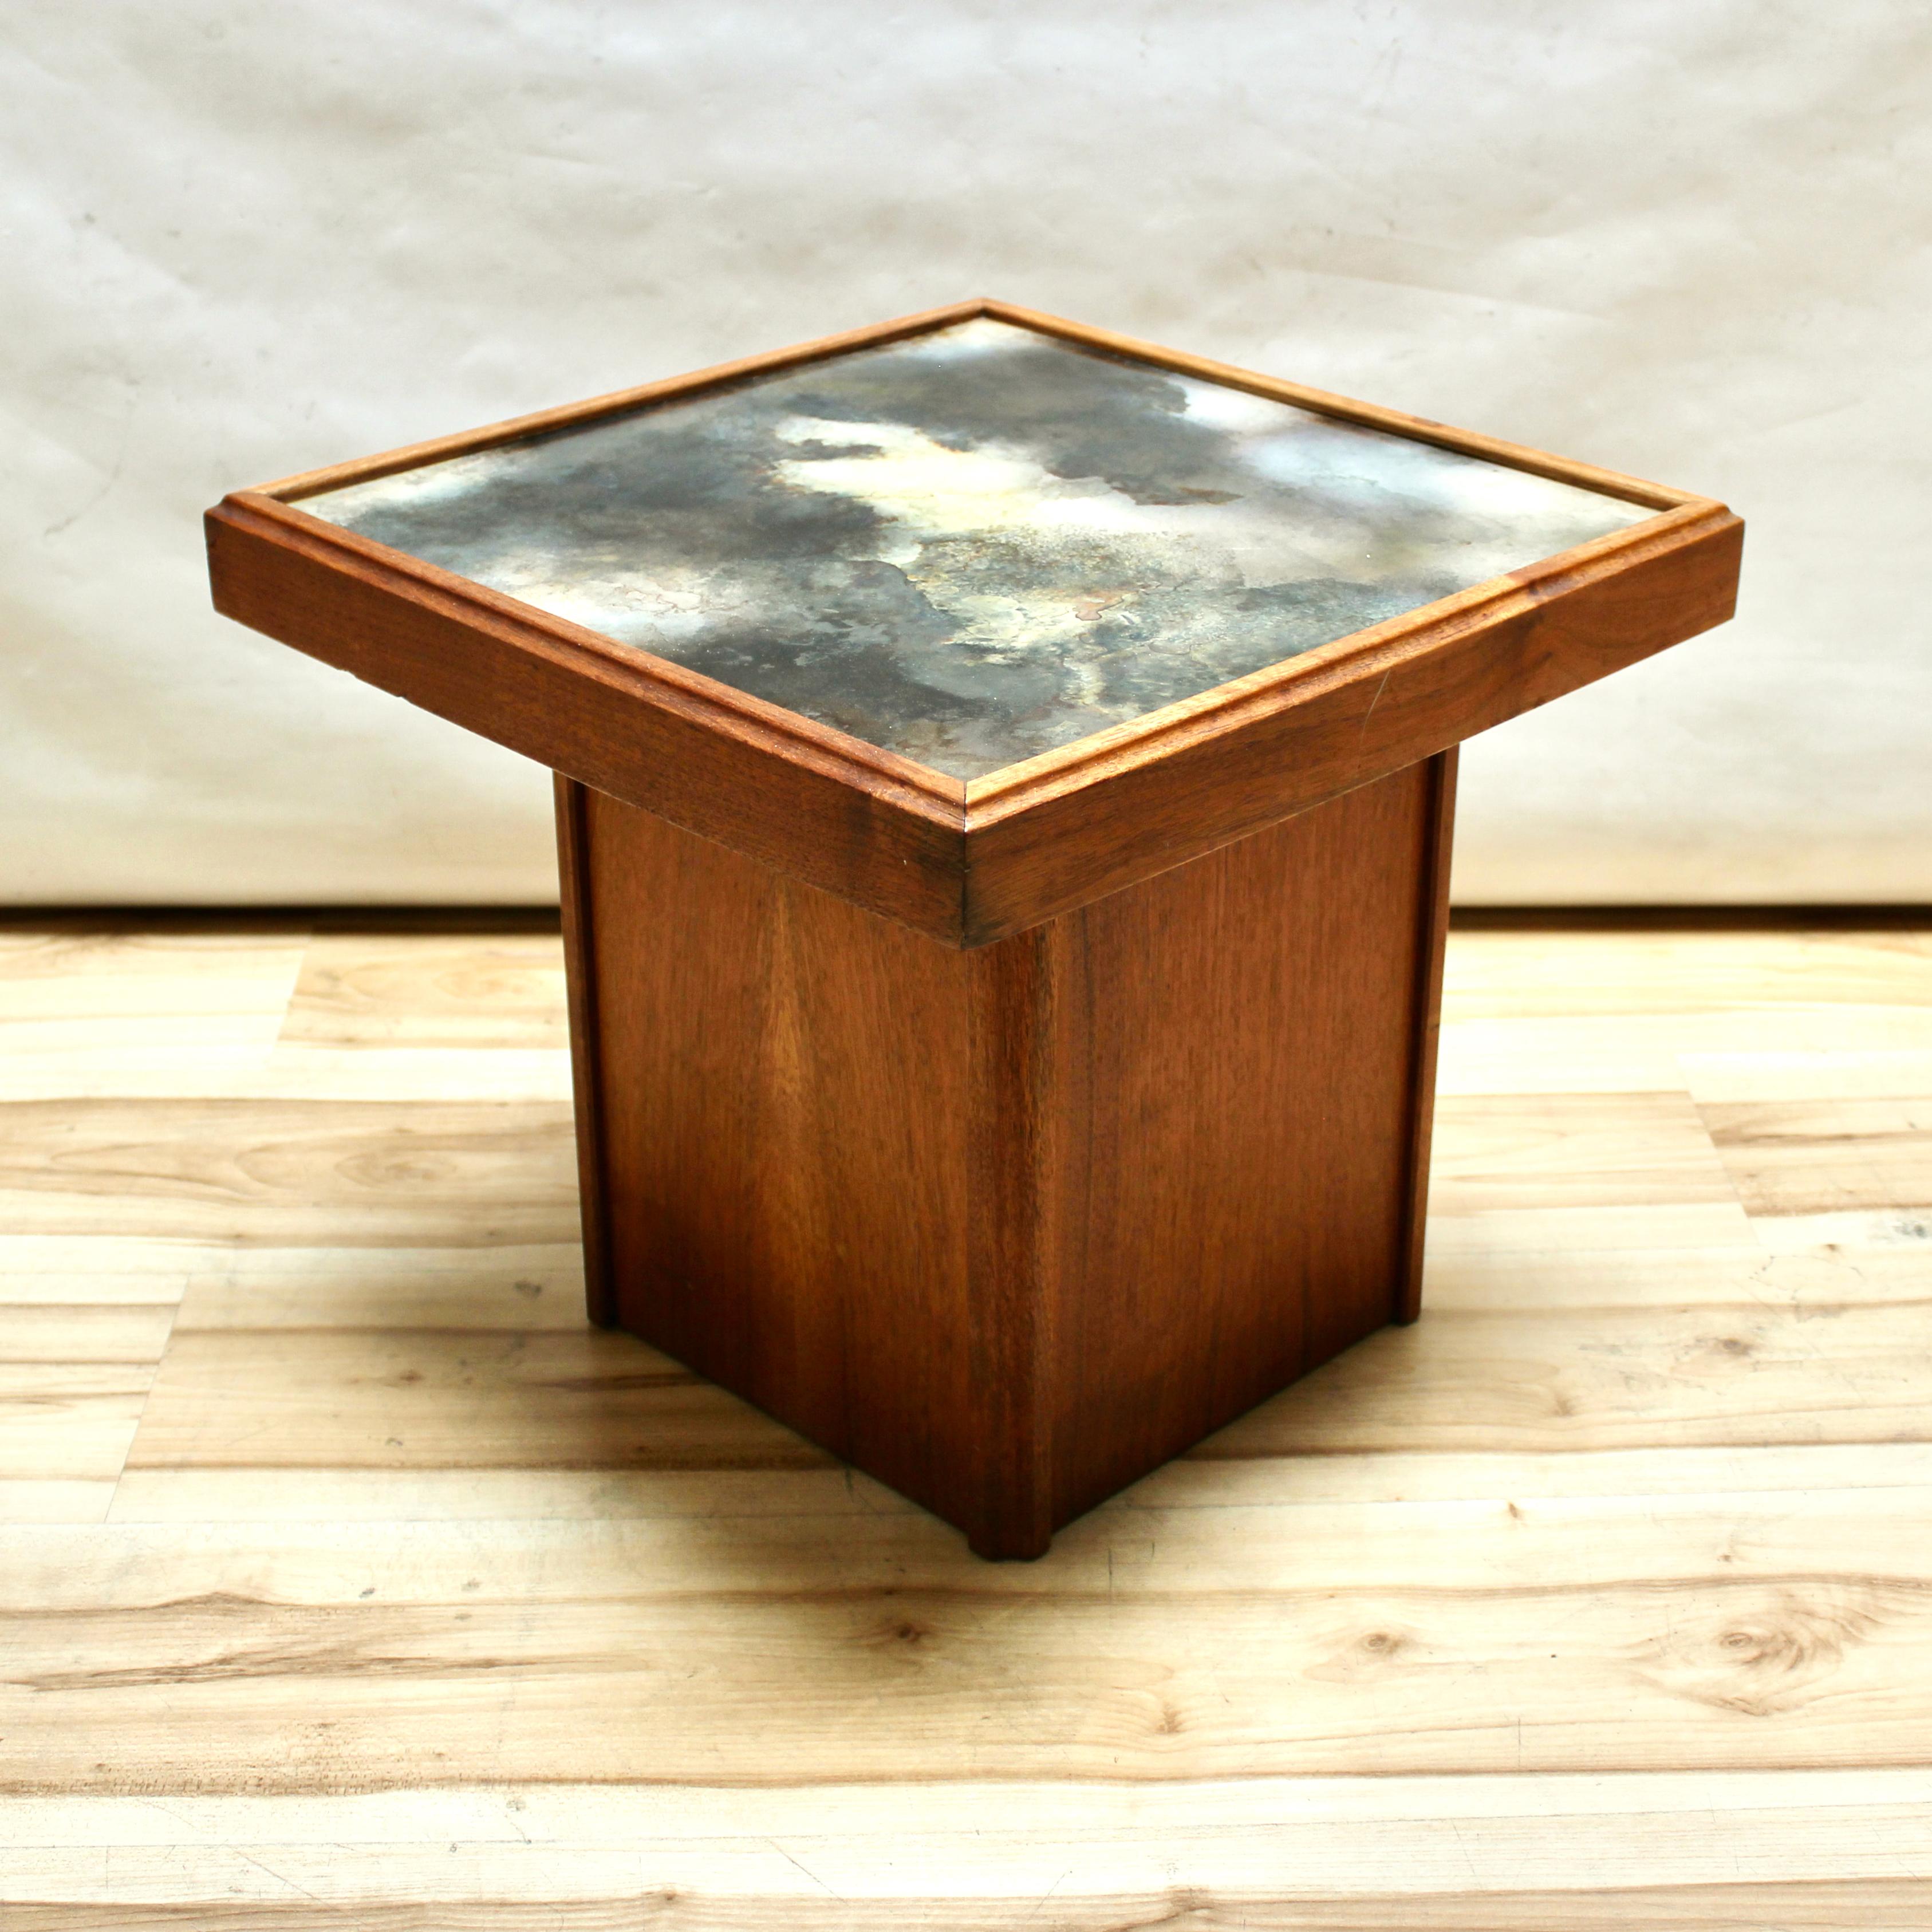 American Mid-Century Modern Walnut and Glass End Table by John Keal for Brown Saltman